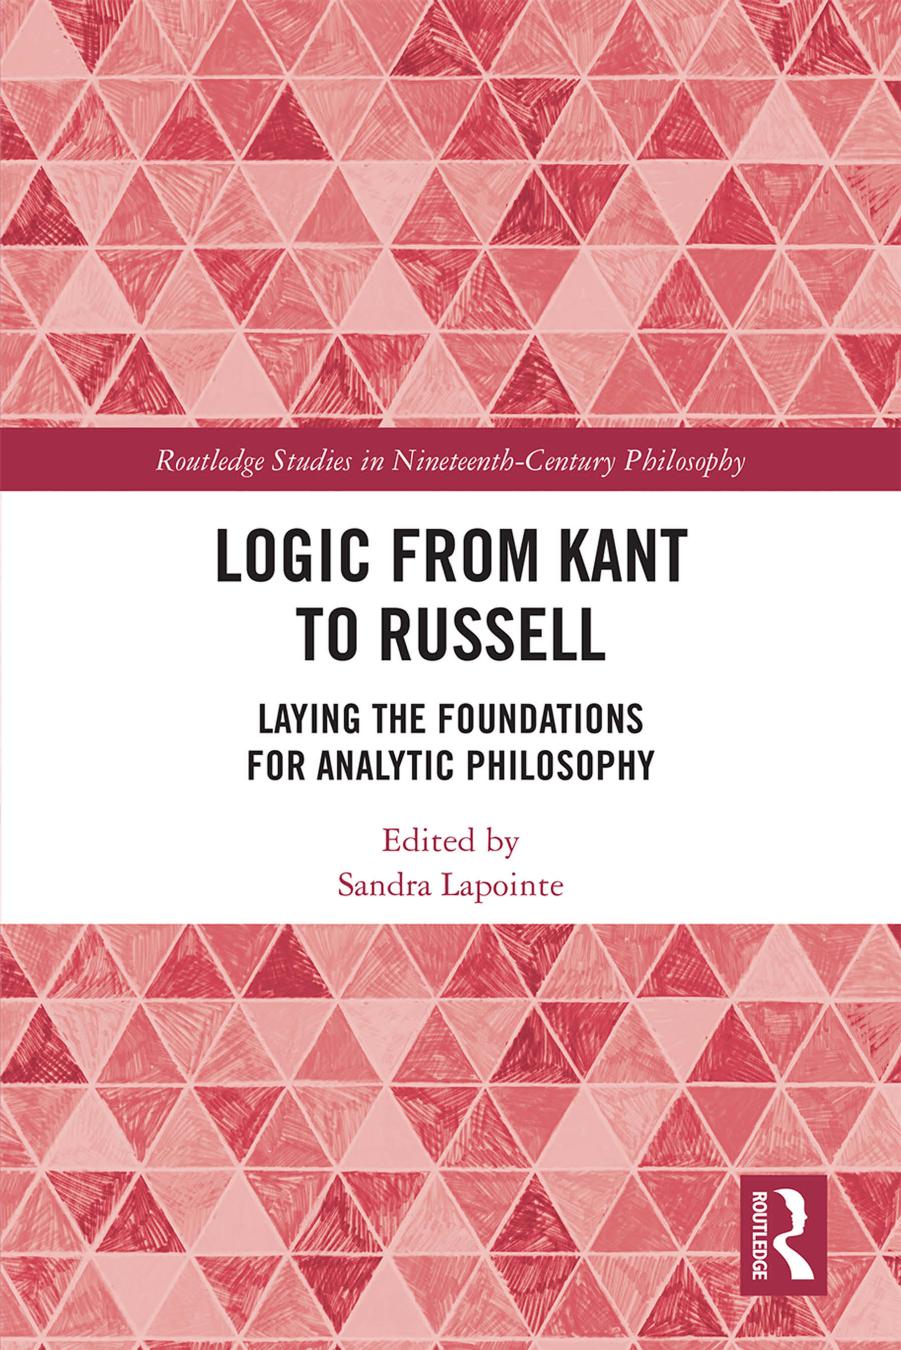 Logic From Kant to Russell: Laying the Foundations for Analytic Philosophy